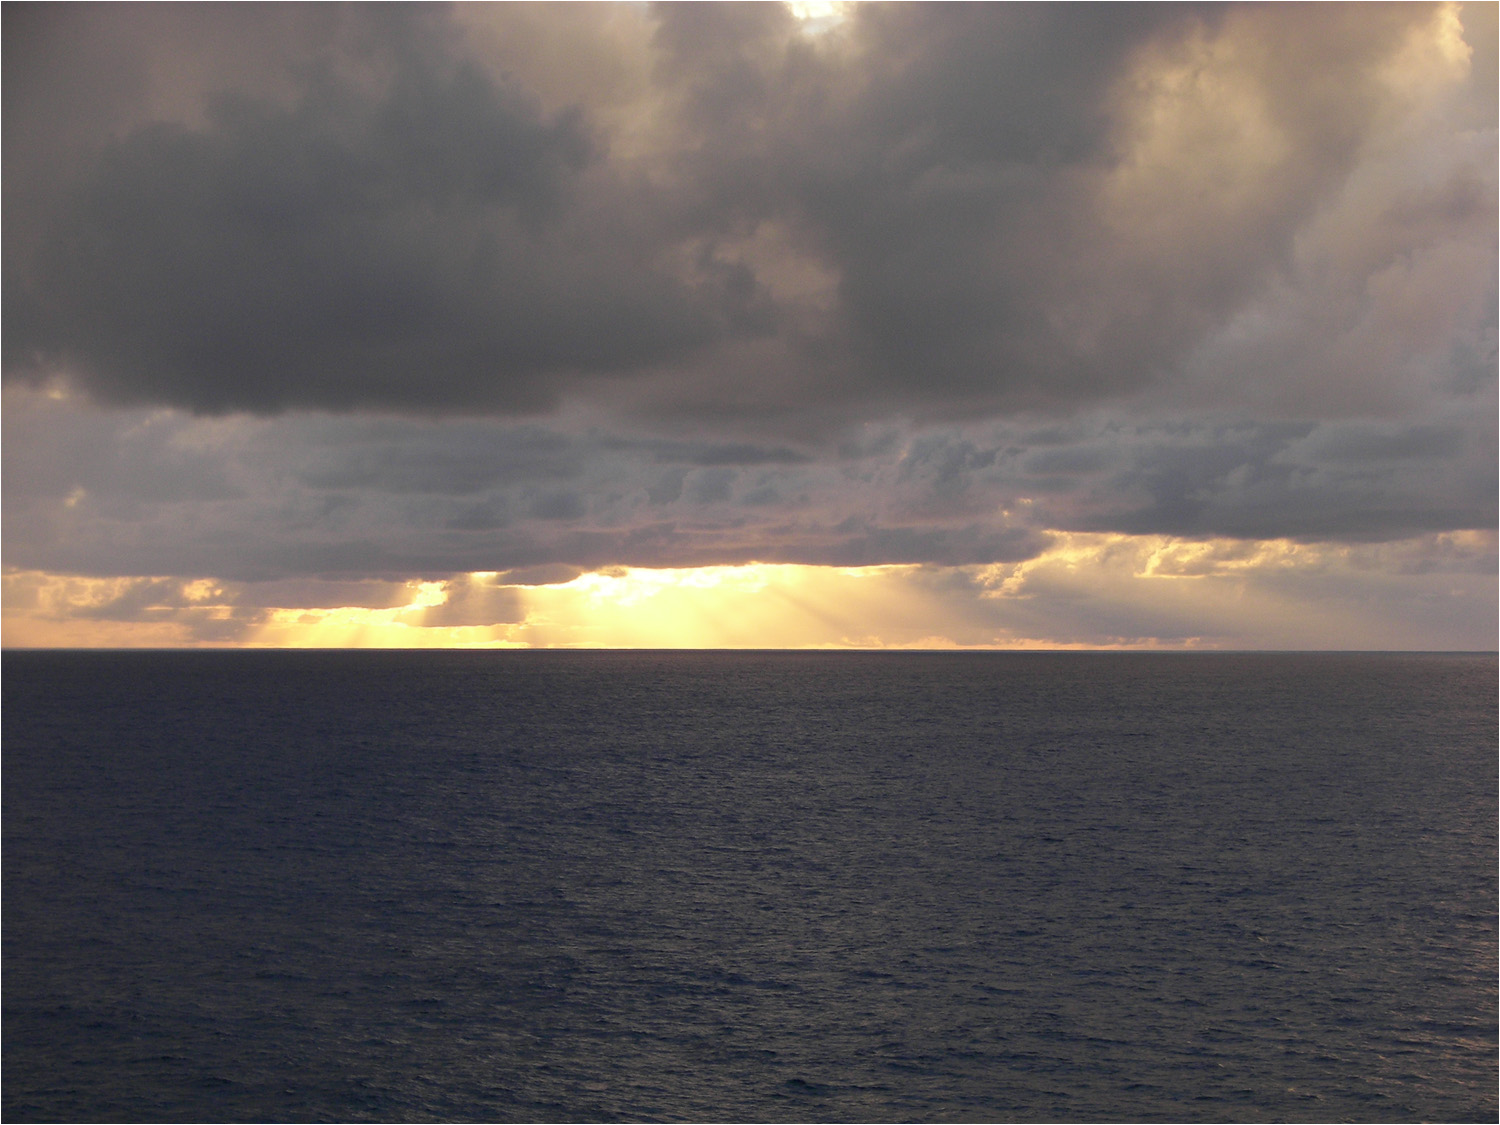 Friday morning sunrise on our way to Huahine about 7AM